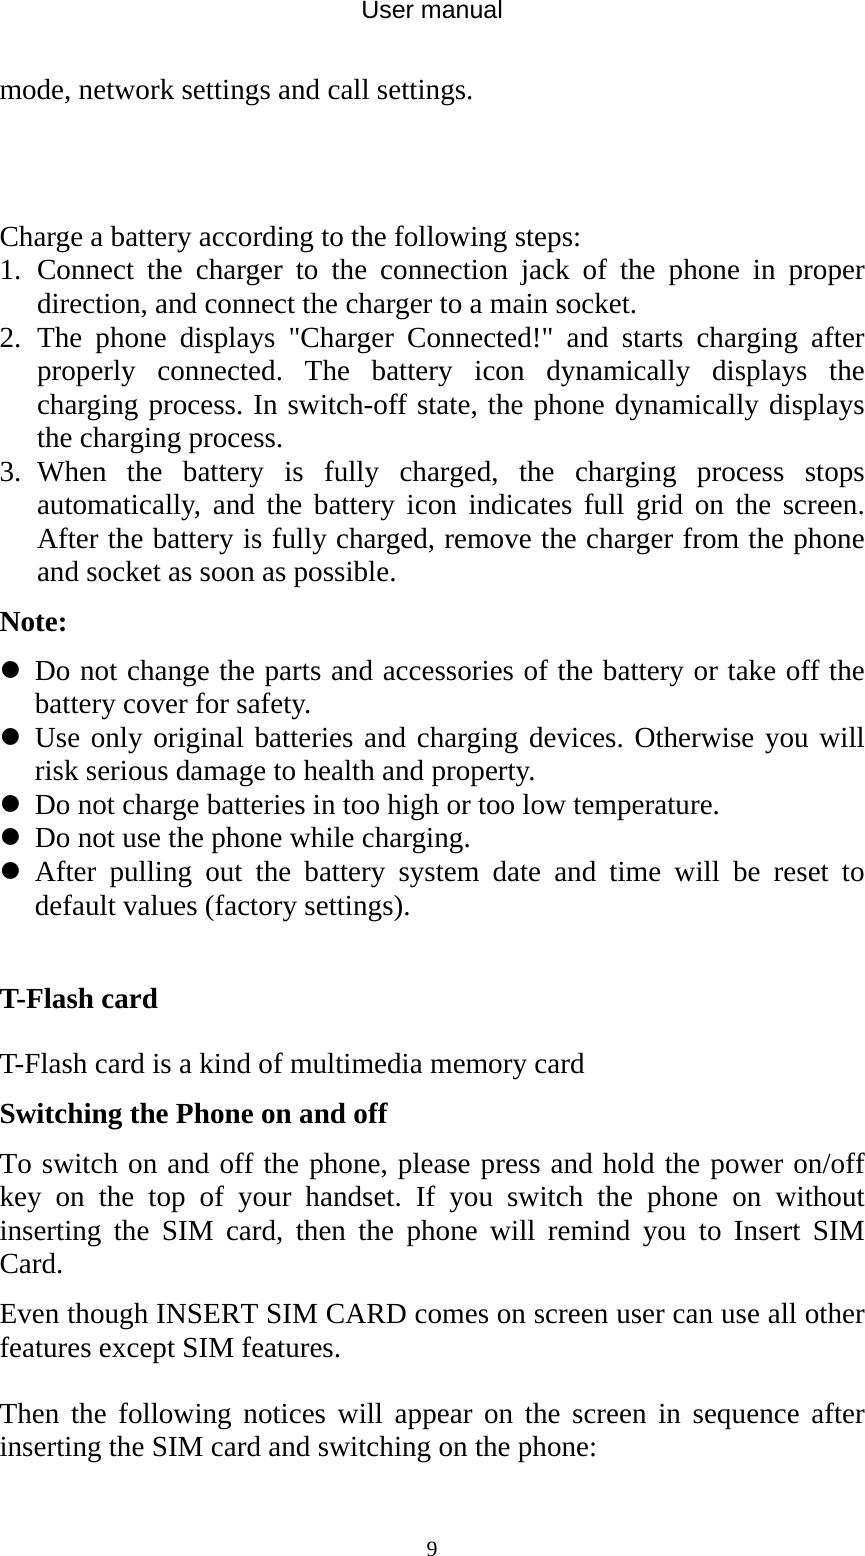 User manual  9mode, network settings and call settings.  Charge a battery according to the following steps: 1. Connect the charger to the connection jack of the phone in proper direction, and connect the charger to a main socket. 2. The phone displays &quot;Charger Connected!&quot; and starts charging after properly connected. The battery icon dynamically displays the charging process. In switch-off state, the phone dynamically displays the charging process. 3. When the battery is fully charged, the charging process stops automatically, and the battery icon indicates full grid on the screen. After the battery is fully charged, remove the charger from the phone and socket as soon as possible. Note:  Do not change the parts and accessories of the battery or take off the battery cover for safety.  Use only original batteries and charging devices. Otherwise you will risk serious damage to health and property.  Do not charge batteries in too high or too low temperature.  Do not use the phone while charging.  After pulling out the battery system date and time will be reset to default values (factory settings).  T-Flash card T-Flash card is a kind of multimedia memory card  Switching the Phone on and off To switch on and off the phone, please press and hold the power on/off key on the top of your handset. If you switch the phone on without inserting the SIM card, then the phone will remind you to Insert SIM Card. Even though INSERT SIM CARD comes on screen user can use all other features except SIM features. Then the following notices will appear on the screen in sequence after inserting the SIM card and switching on the phone: 